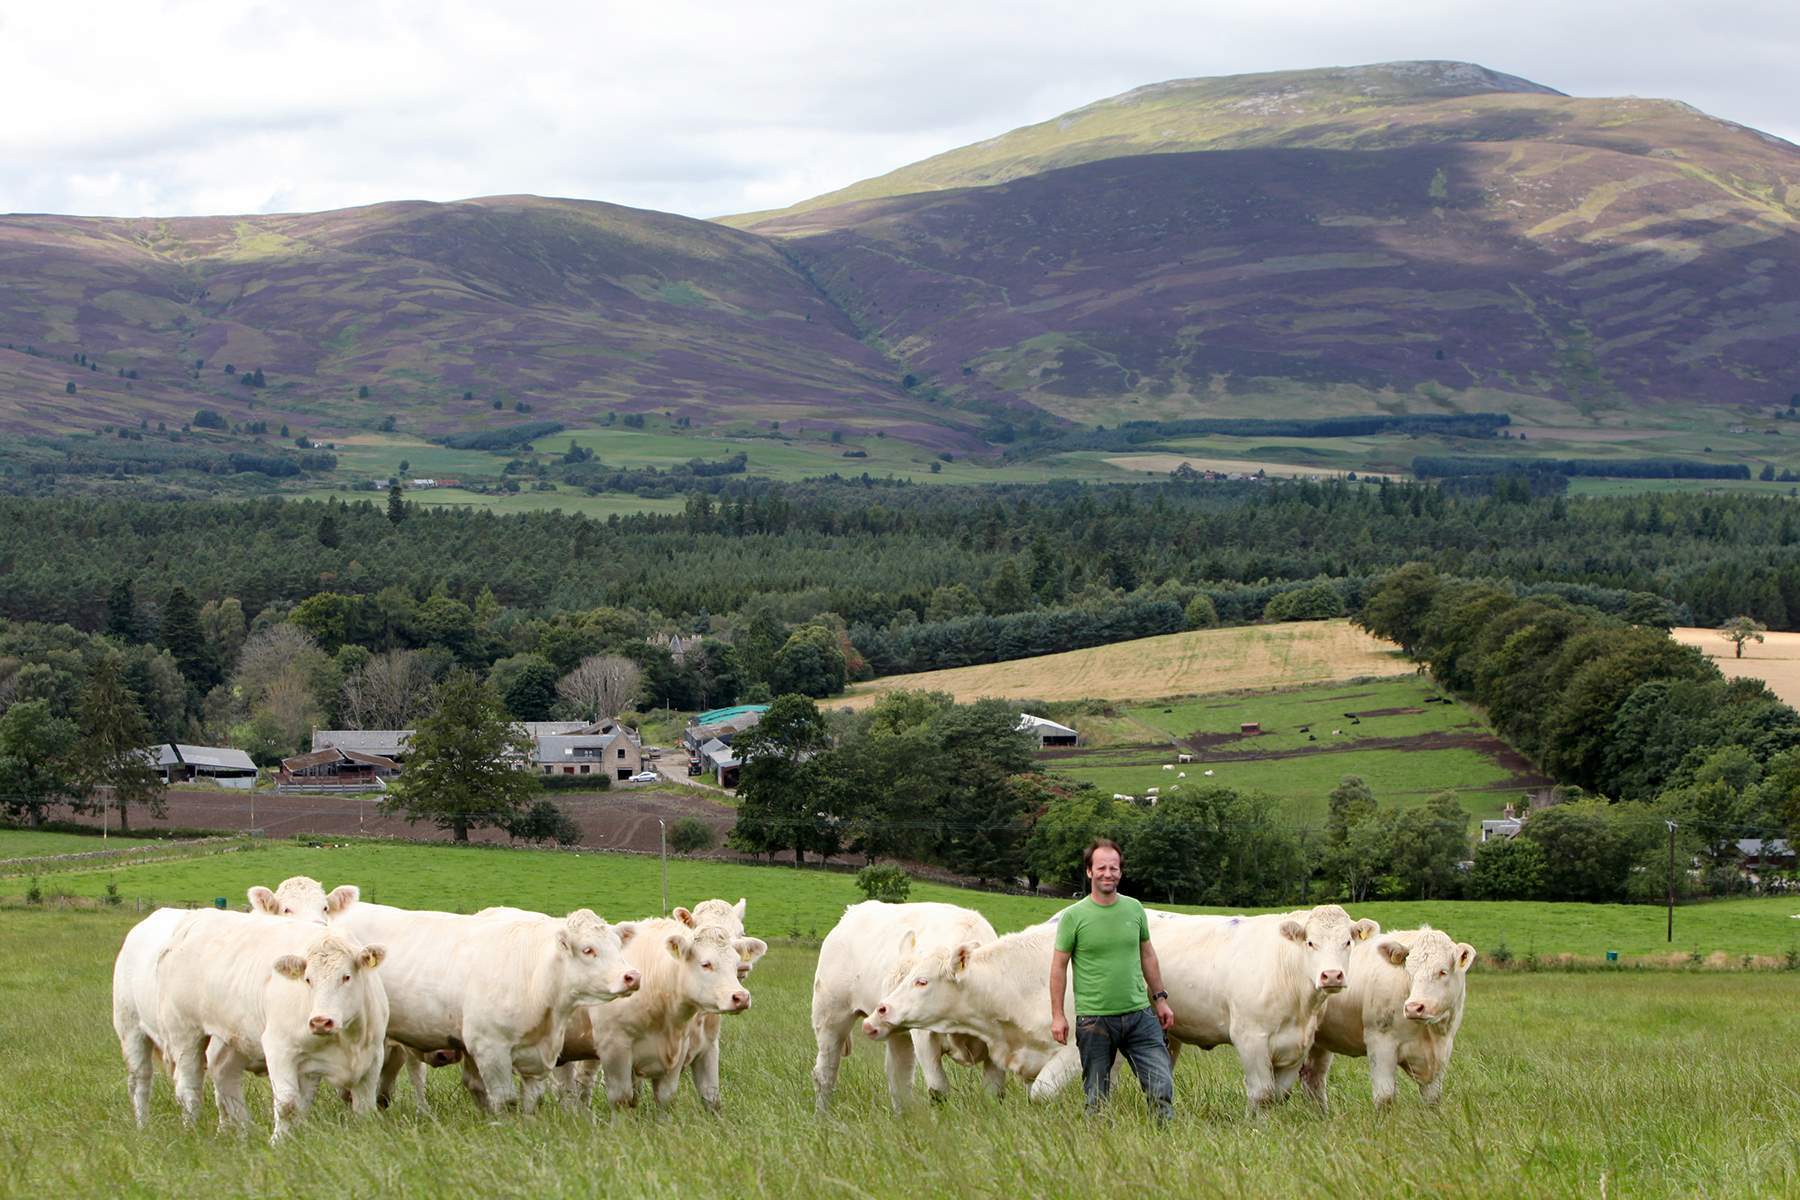 Graeme Massie with some of the Blelack Charolais cattle